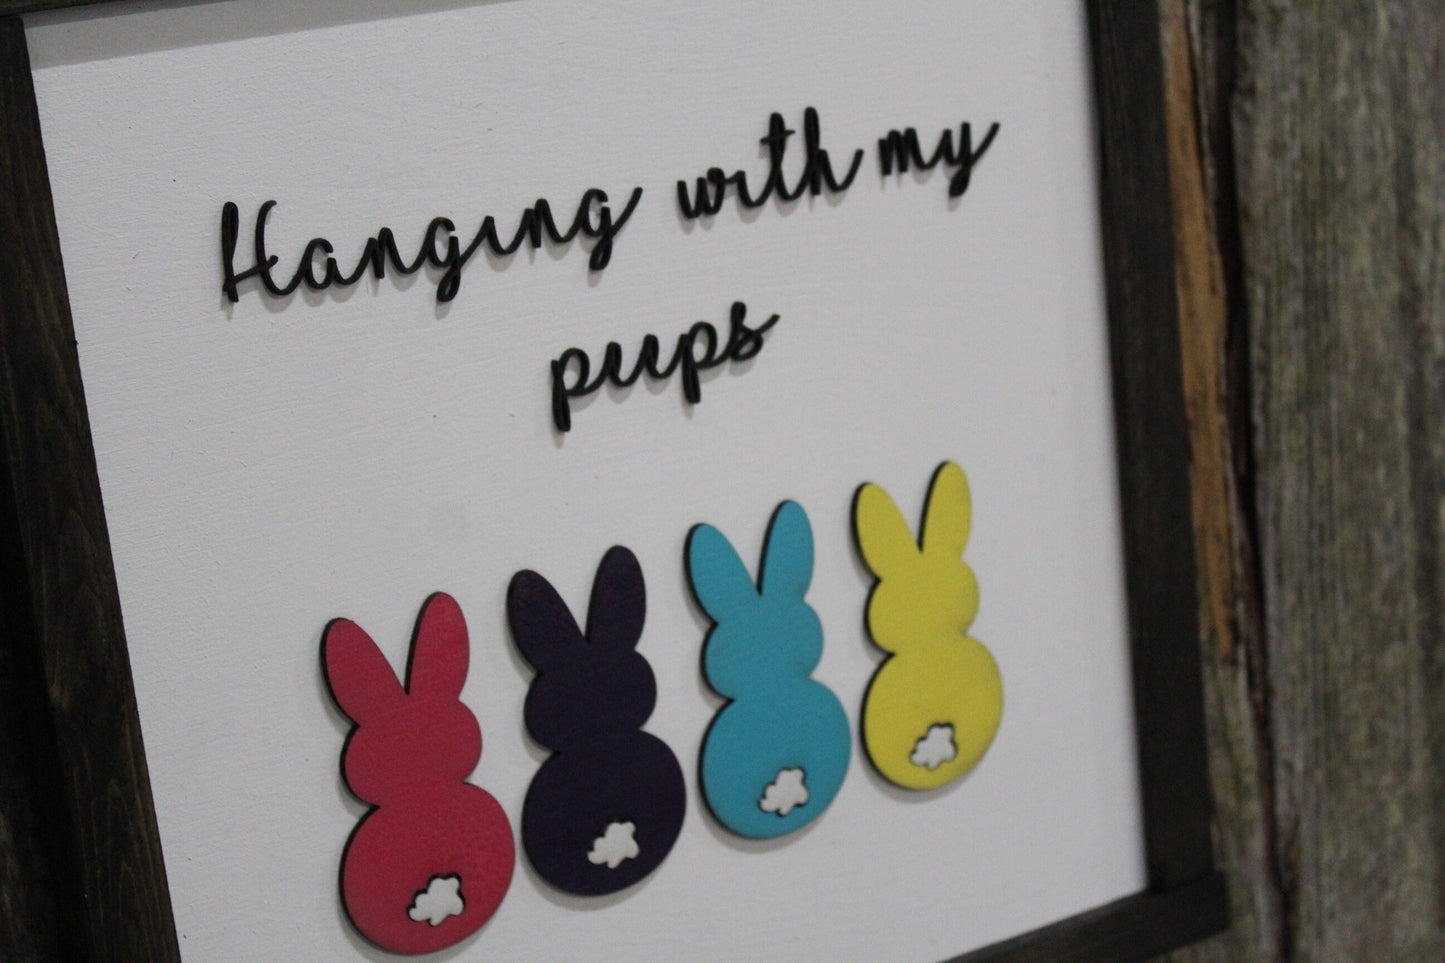 Peeps Bunnies Spring Wood Sign Hanging With My Peeps Candy 3D Raised Text Decoration Easter Pastel Rabbit Décor Decoration Farmhouse Rustic